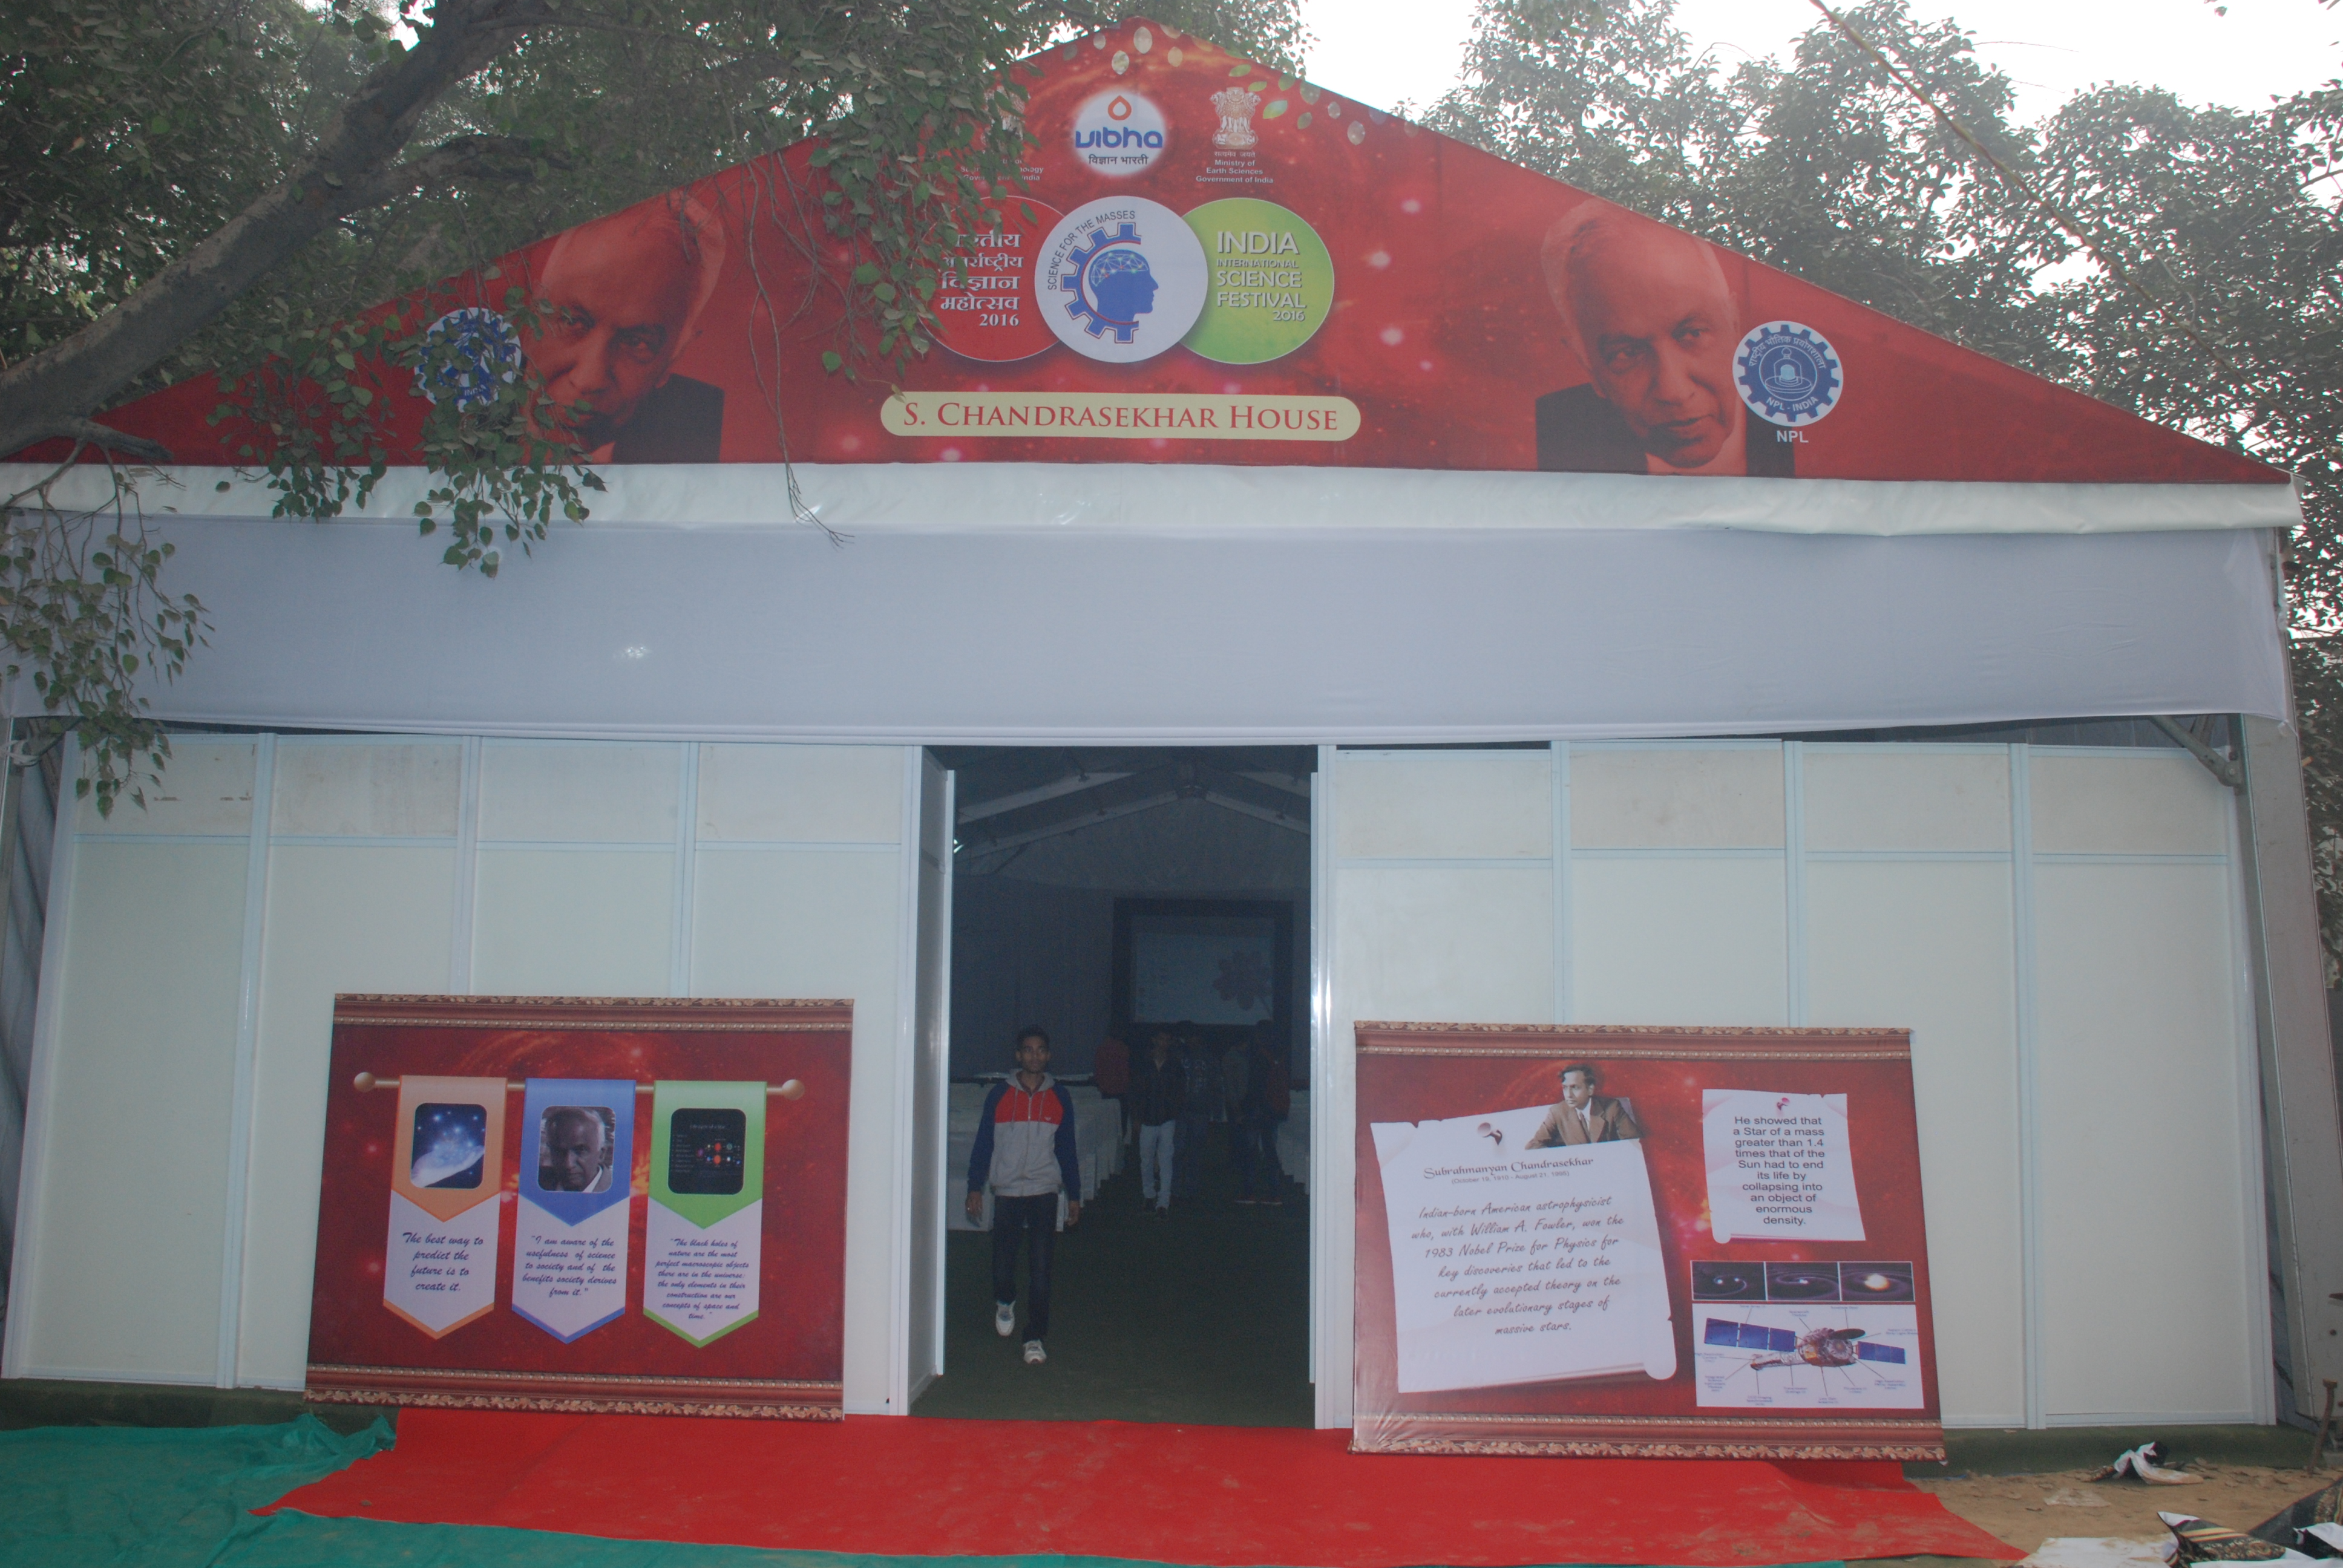  Eminent Astrophysicist S Chandrasekhar house in Science Village at IISF 2016